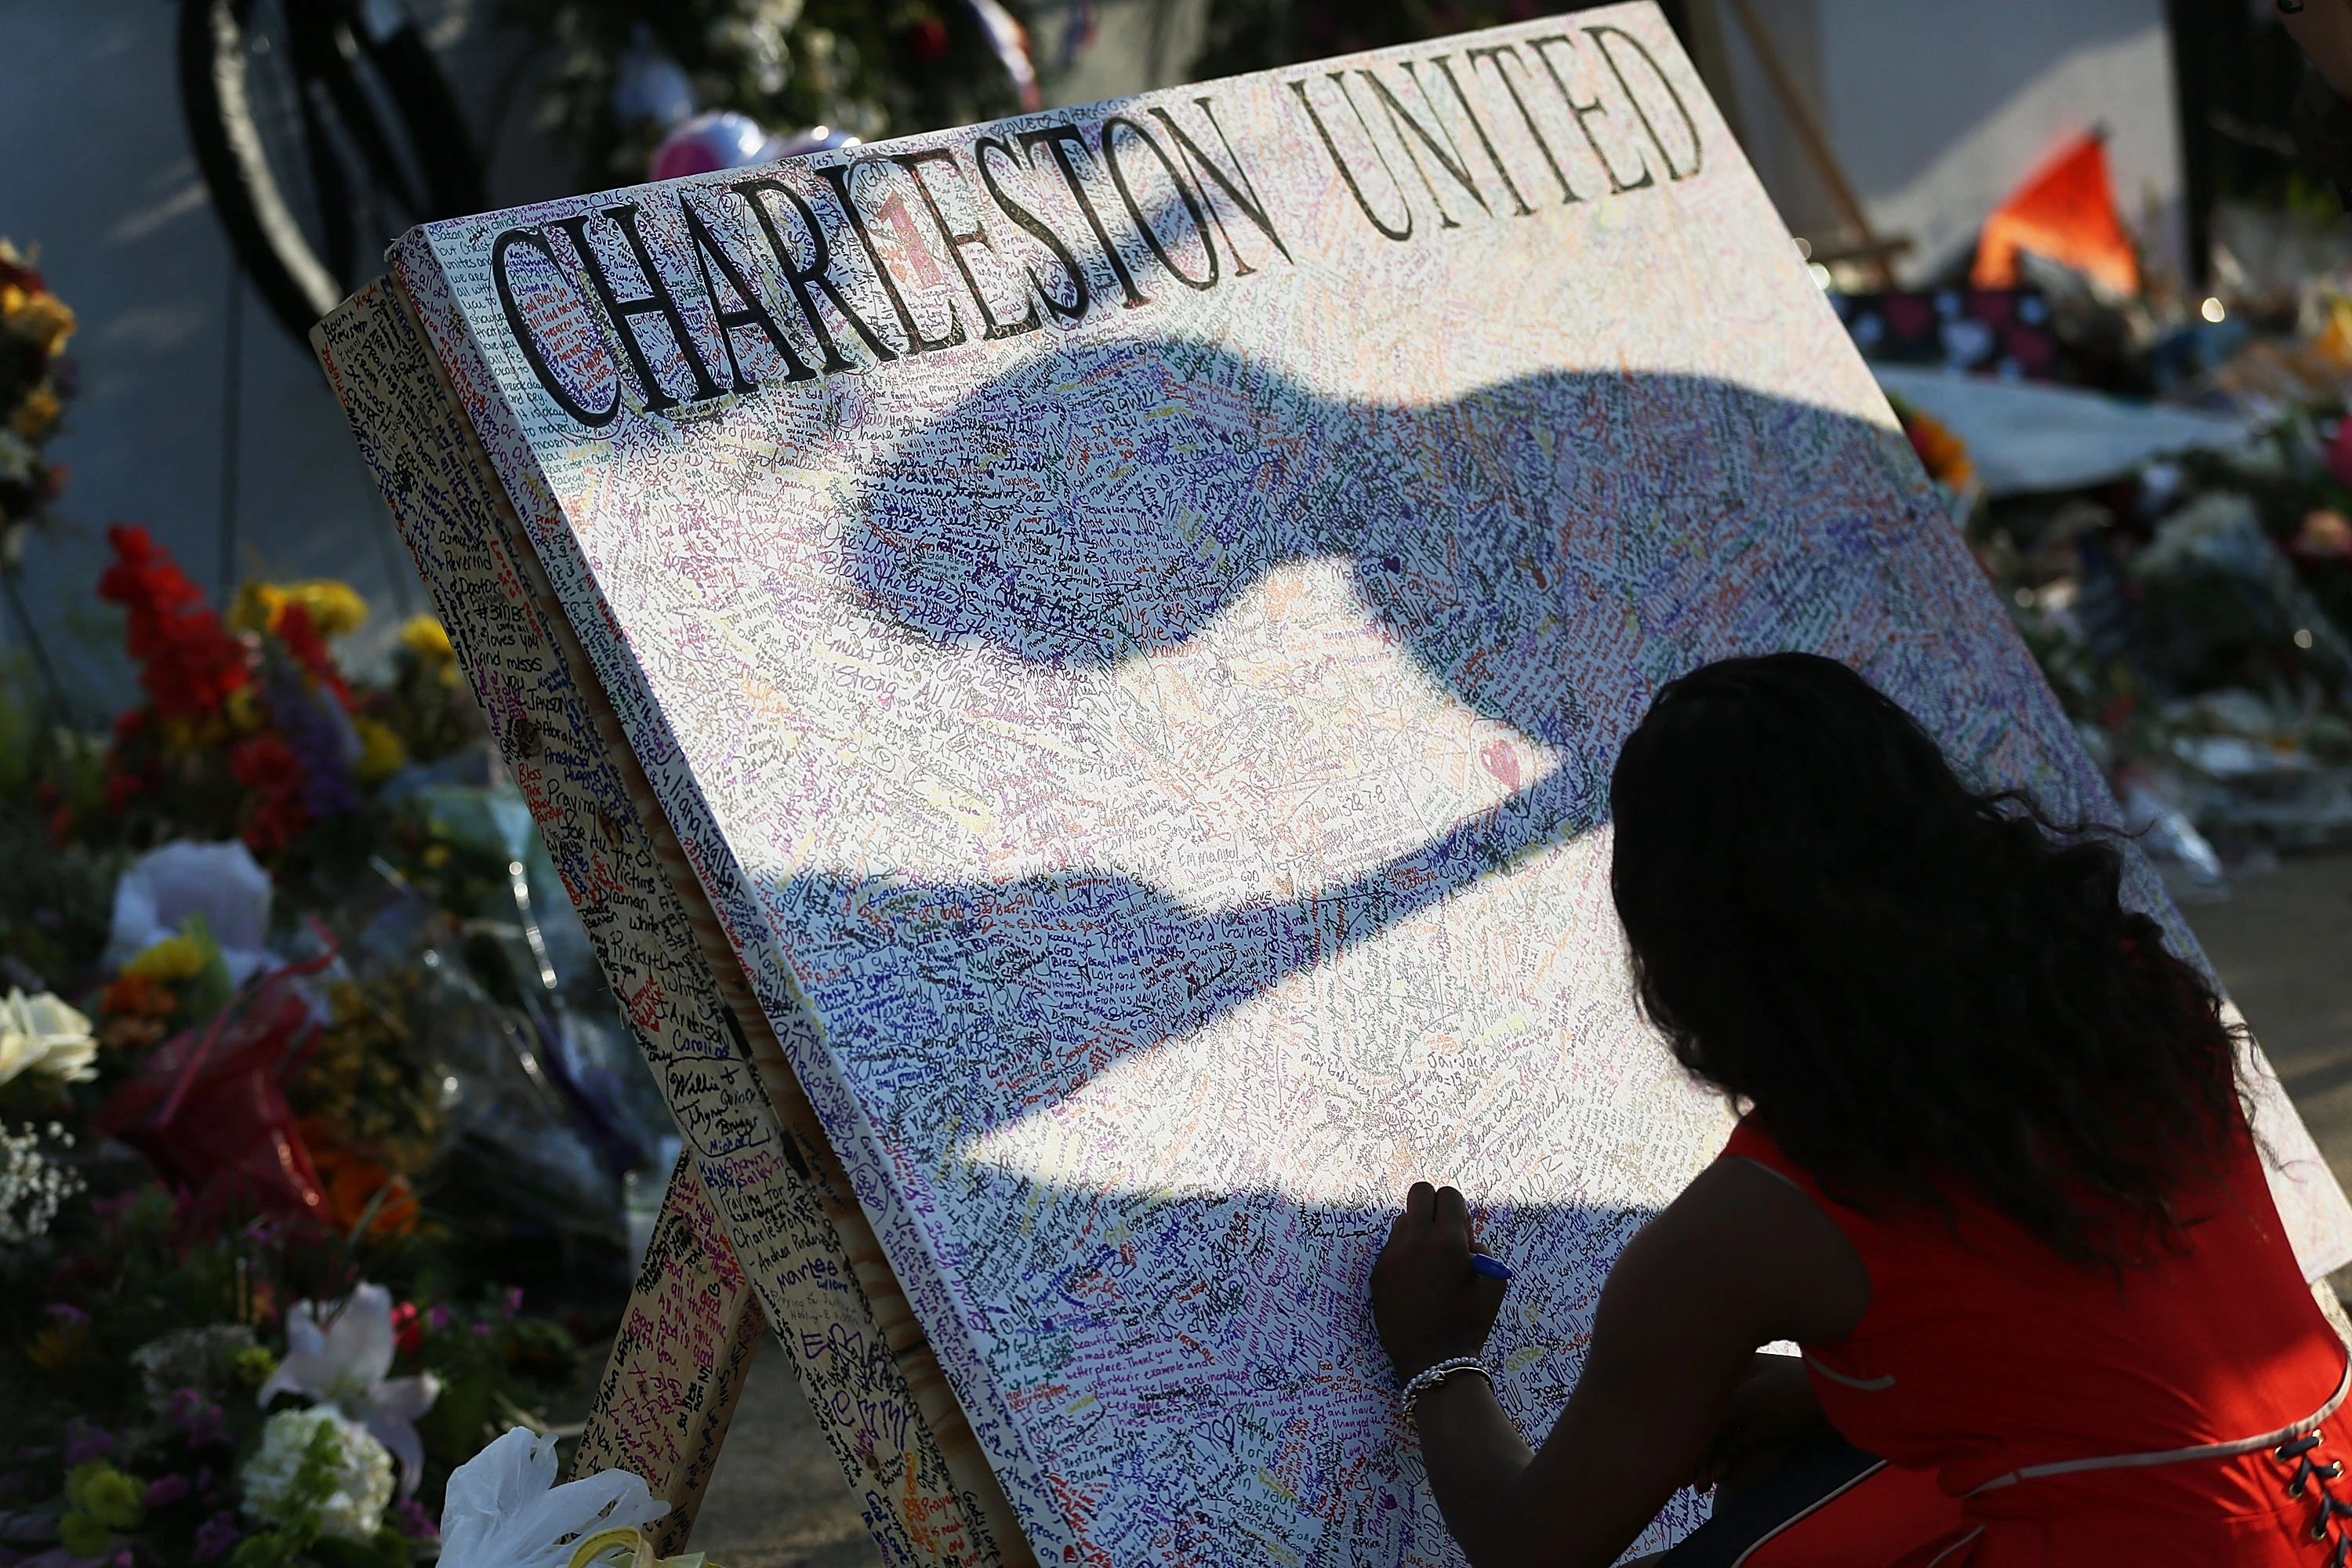 CHARLESTON, SC - JUNE 22:  Alana Simmons leaves a message on a board set up in front of the Emanuel African Methodist Episcopal Church after a mass shooting at the church killed nine people, on June 22, 2015. 21-year-old Dylann Roof is suspected of killing nine people during a prayer meeting in the church in Charleston, which is one of the nation's oldest black churches. (Photo by Joe Raedle/Getty Images)